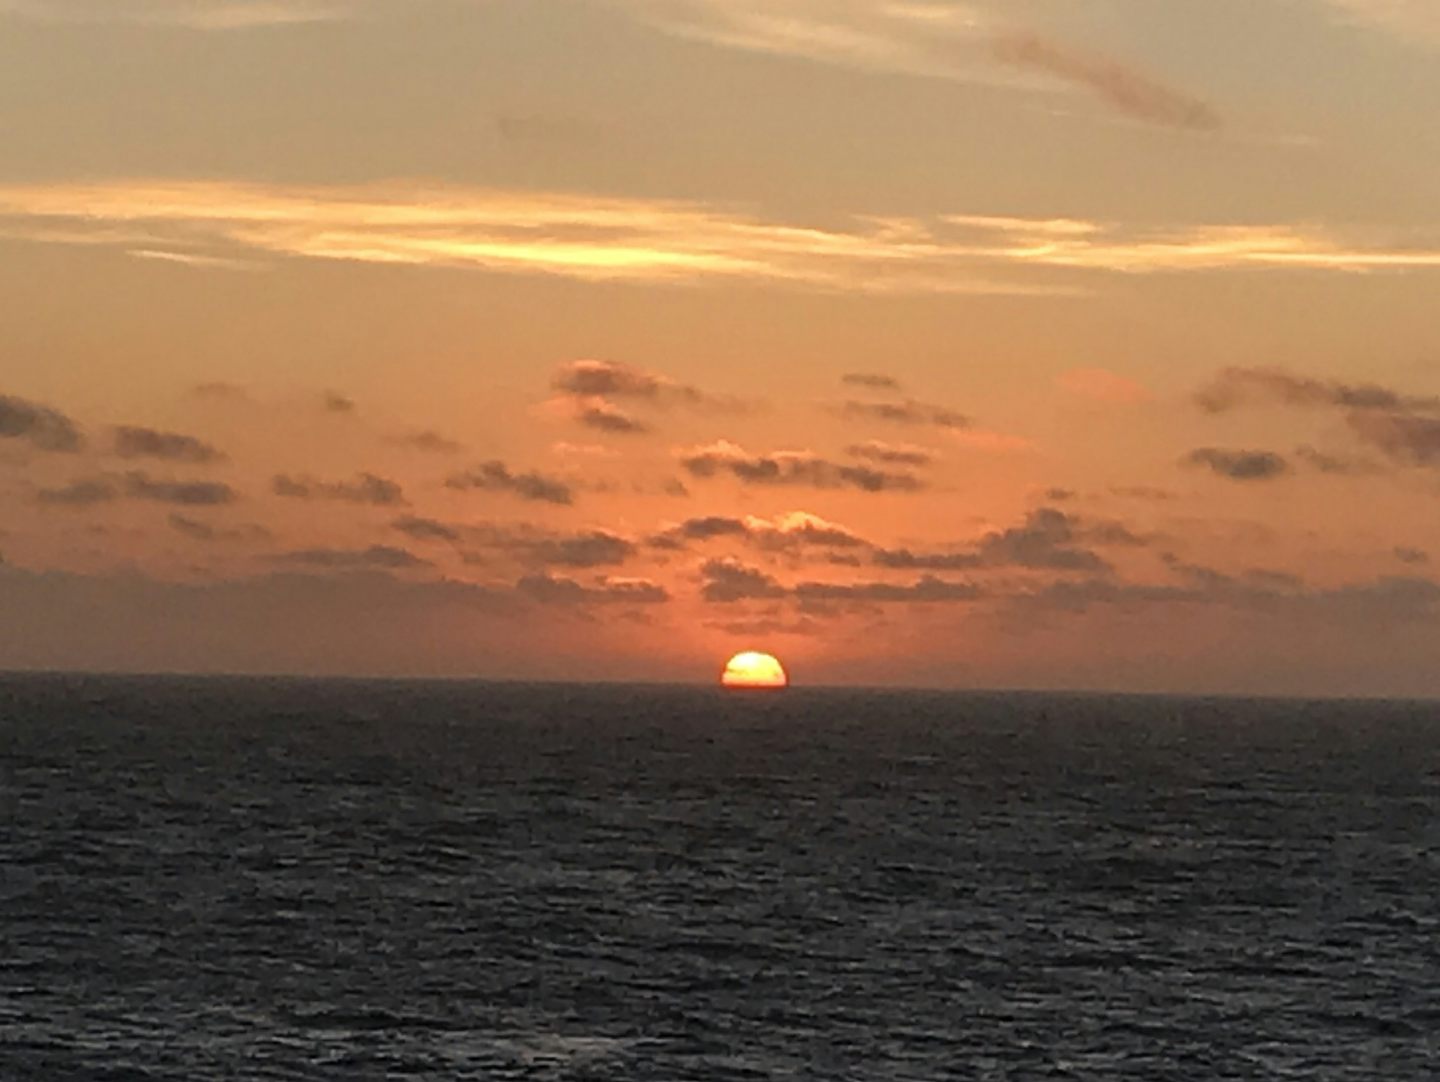 Sunset from our stateroom balcony